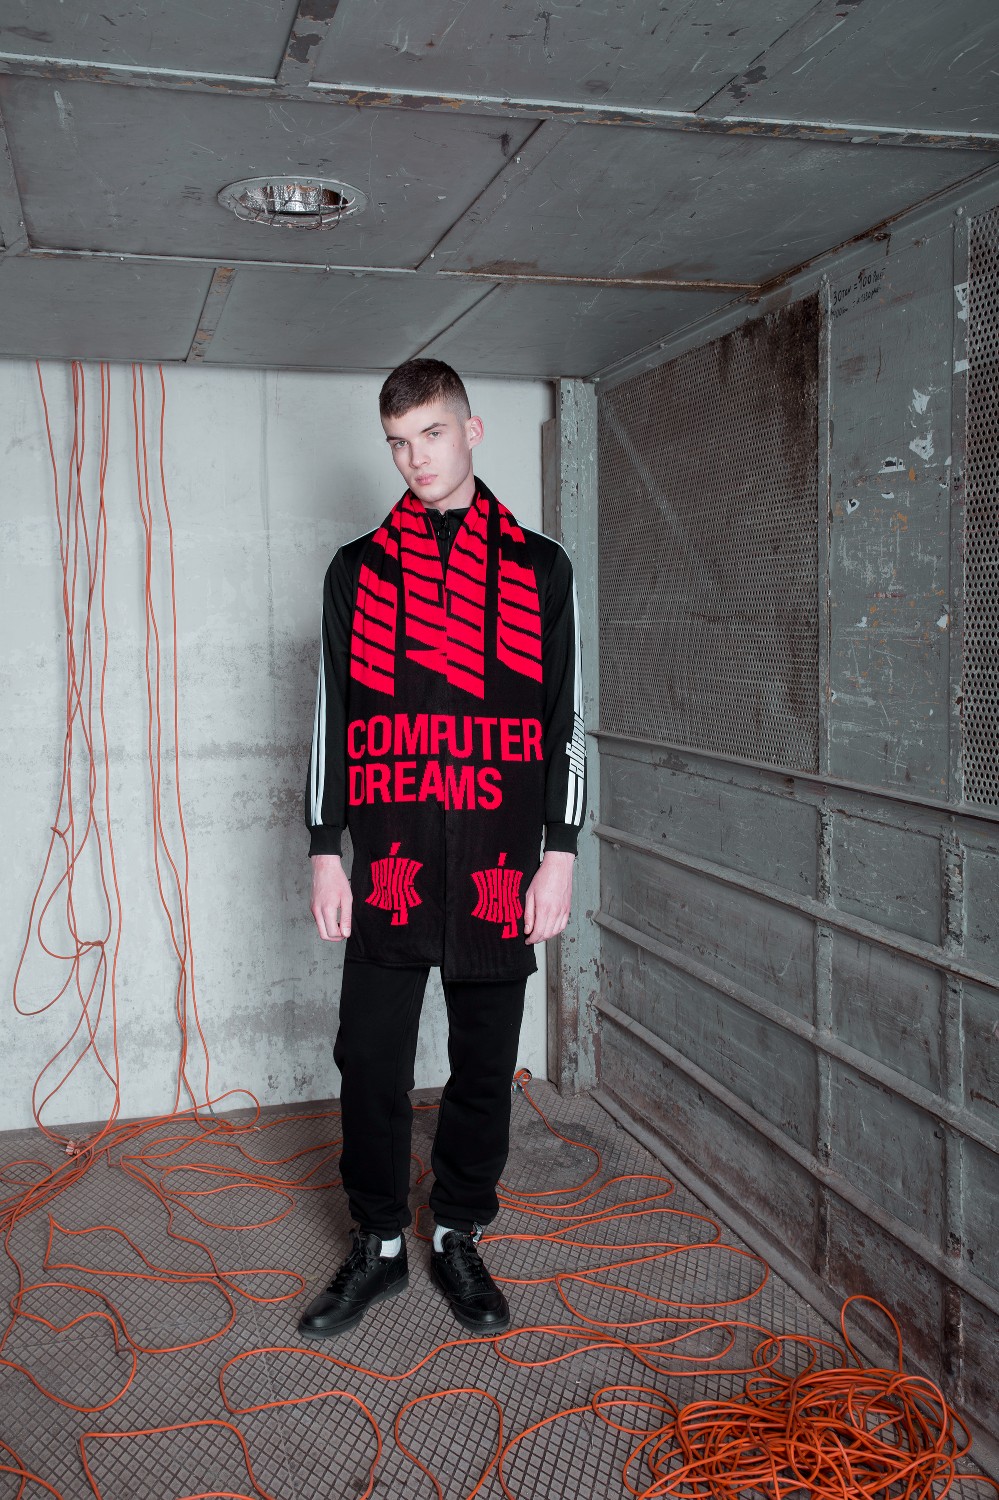 Take a Look at NEIGE’s “Computer Dreams” Collection